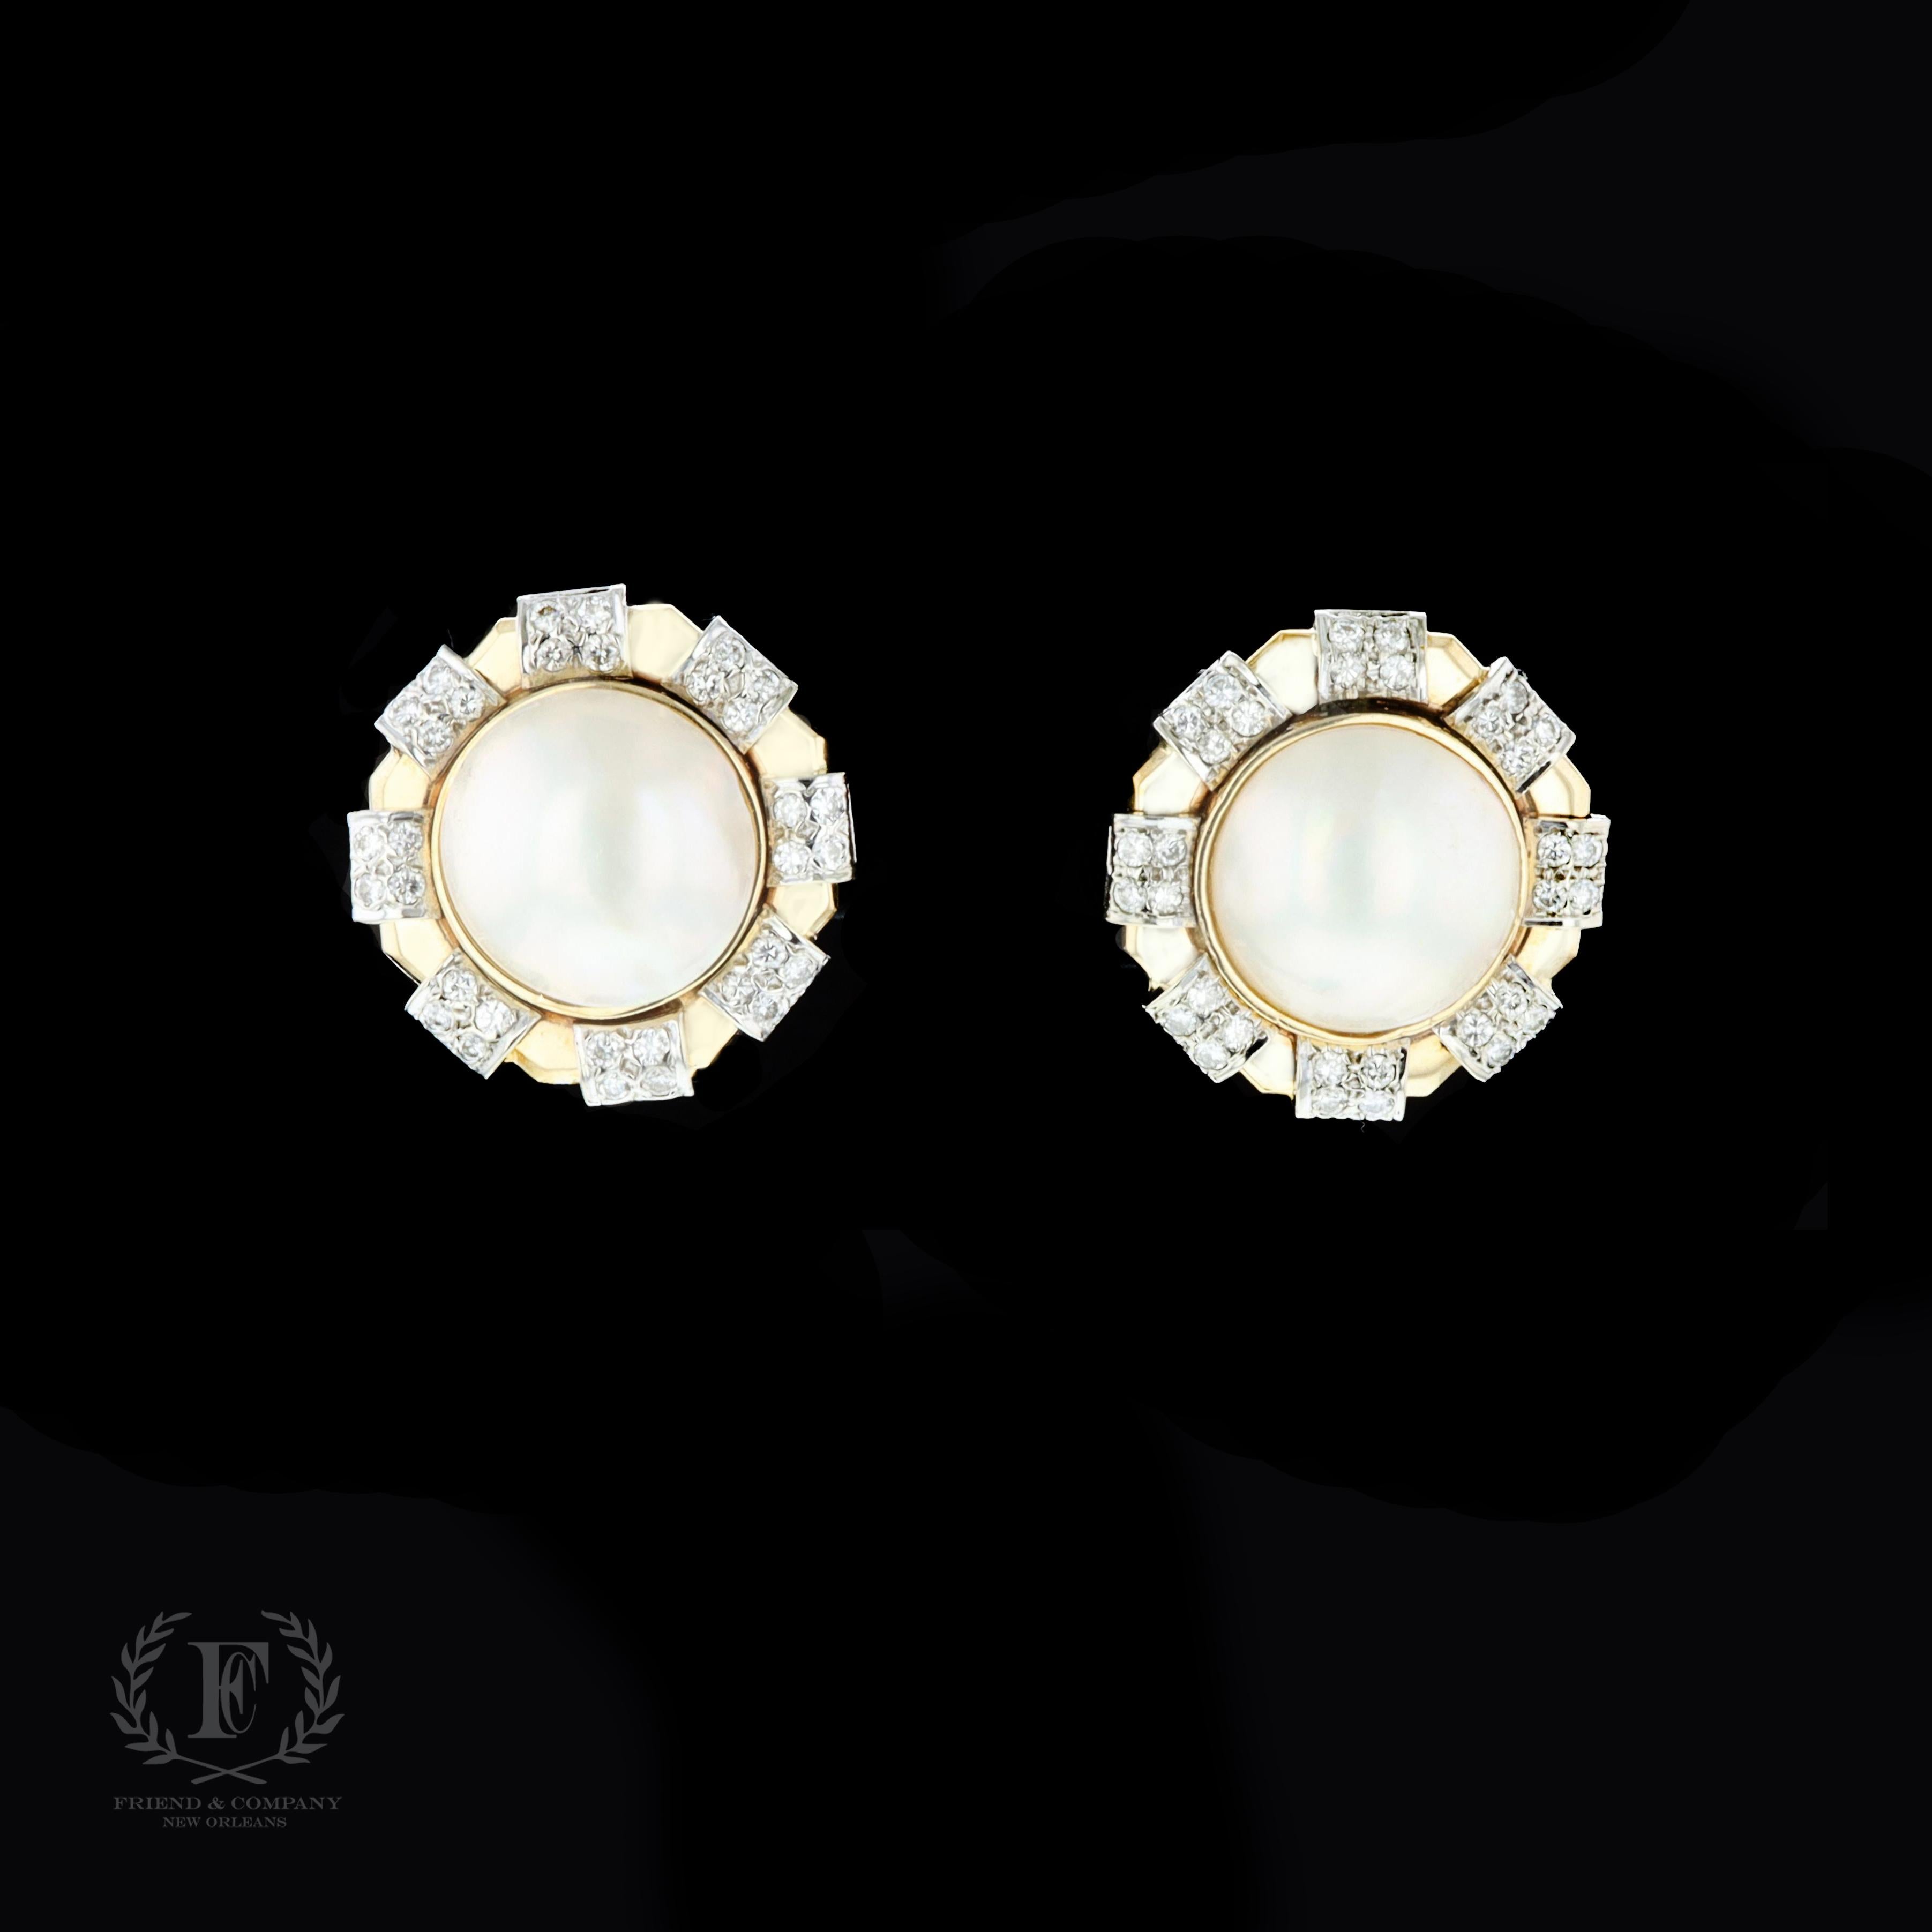 A classic and sophisticated pair of 14 karat yellow gold pearl and diamond earrings. The earrings feature 2 round cream Mabe pearls measuring 16 millimeters each. 64 round cut diamonds sparkle in this spectacular pair of earrings.